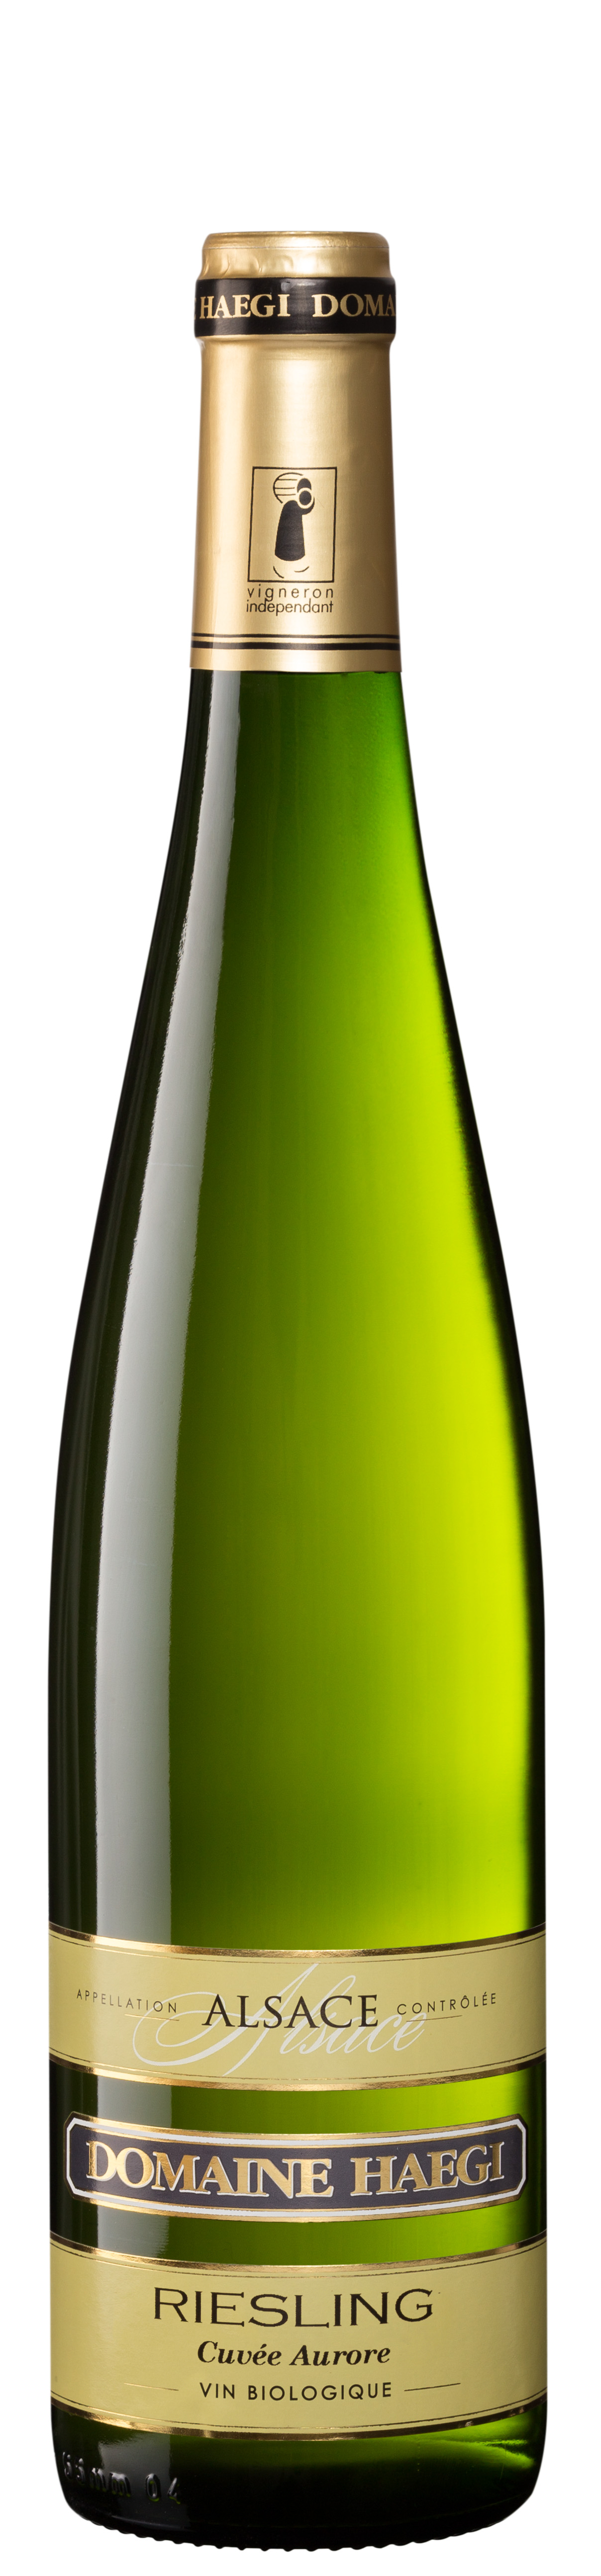 Riesling Cuveé Aurore 2021